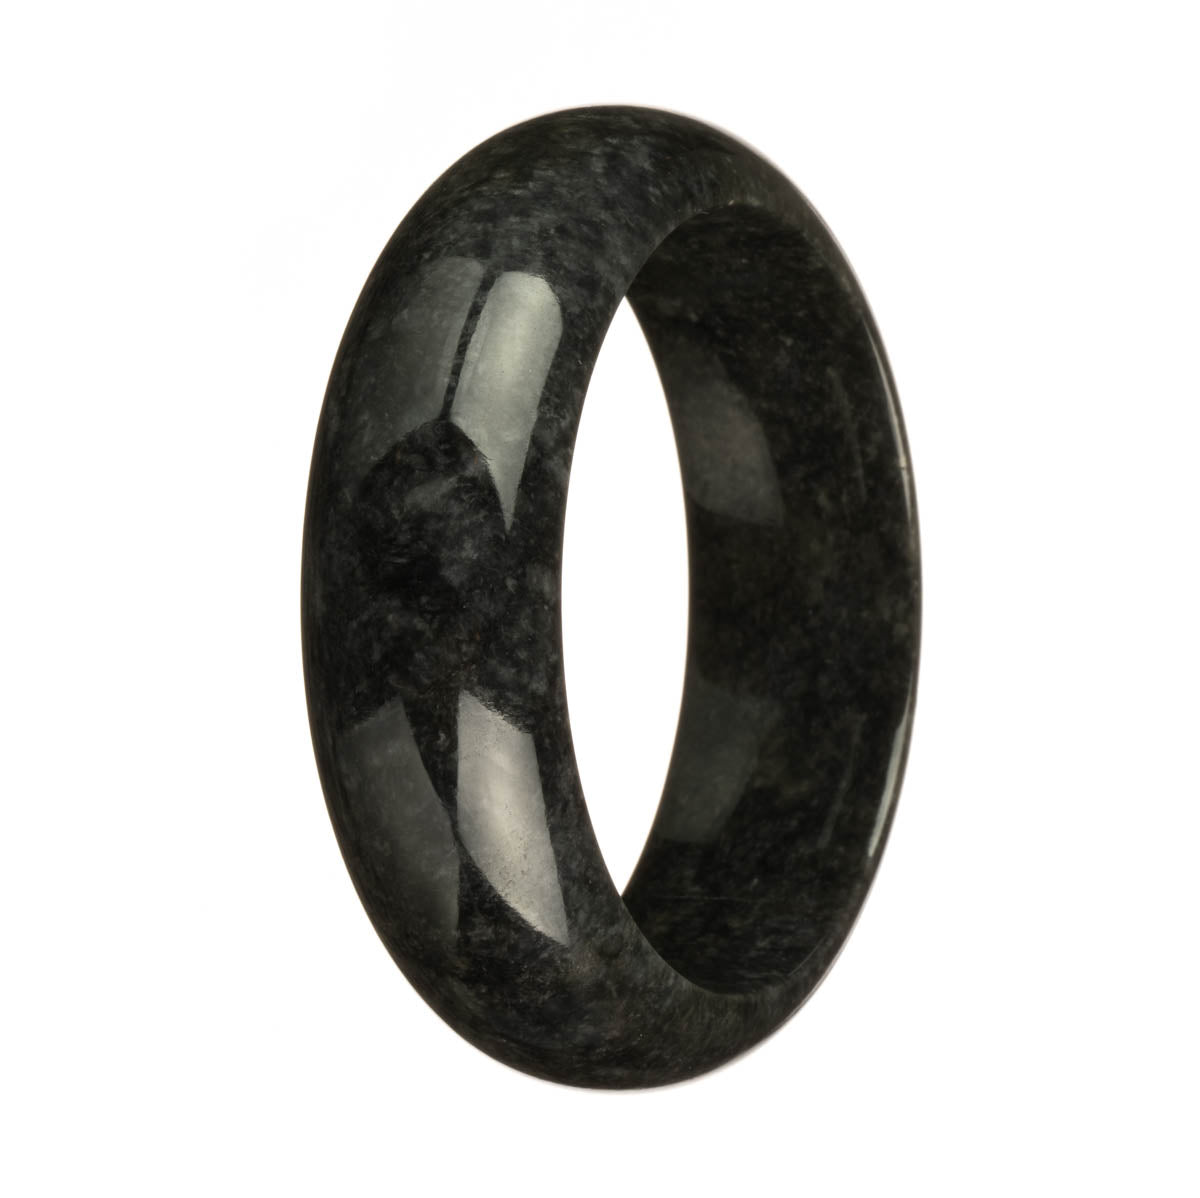 A beautiful half moon-shaped black Burma jade bangle bracelet, measuring 61mm in size. Expertly crafted with genuine, natural jade. Perfect for adding a touch of elegance to any outfit.